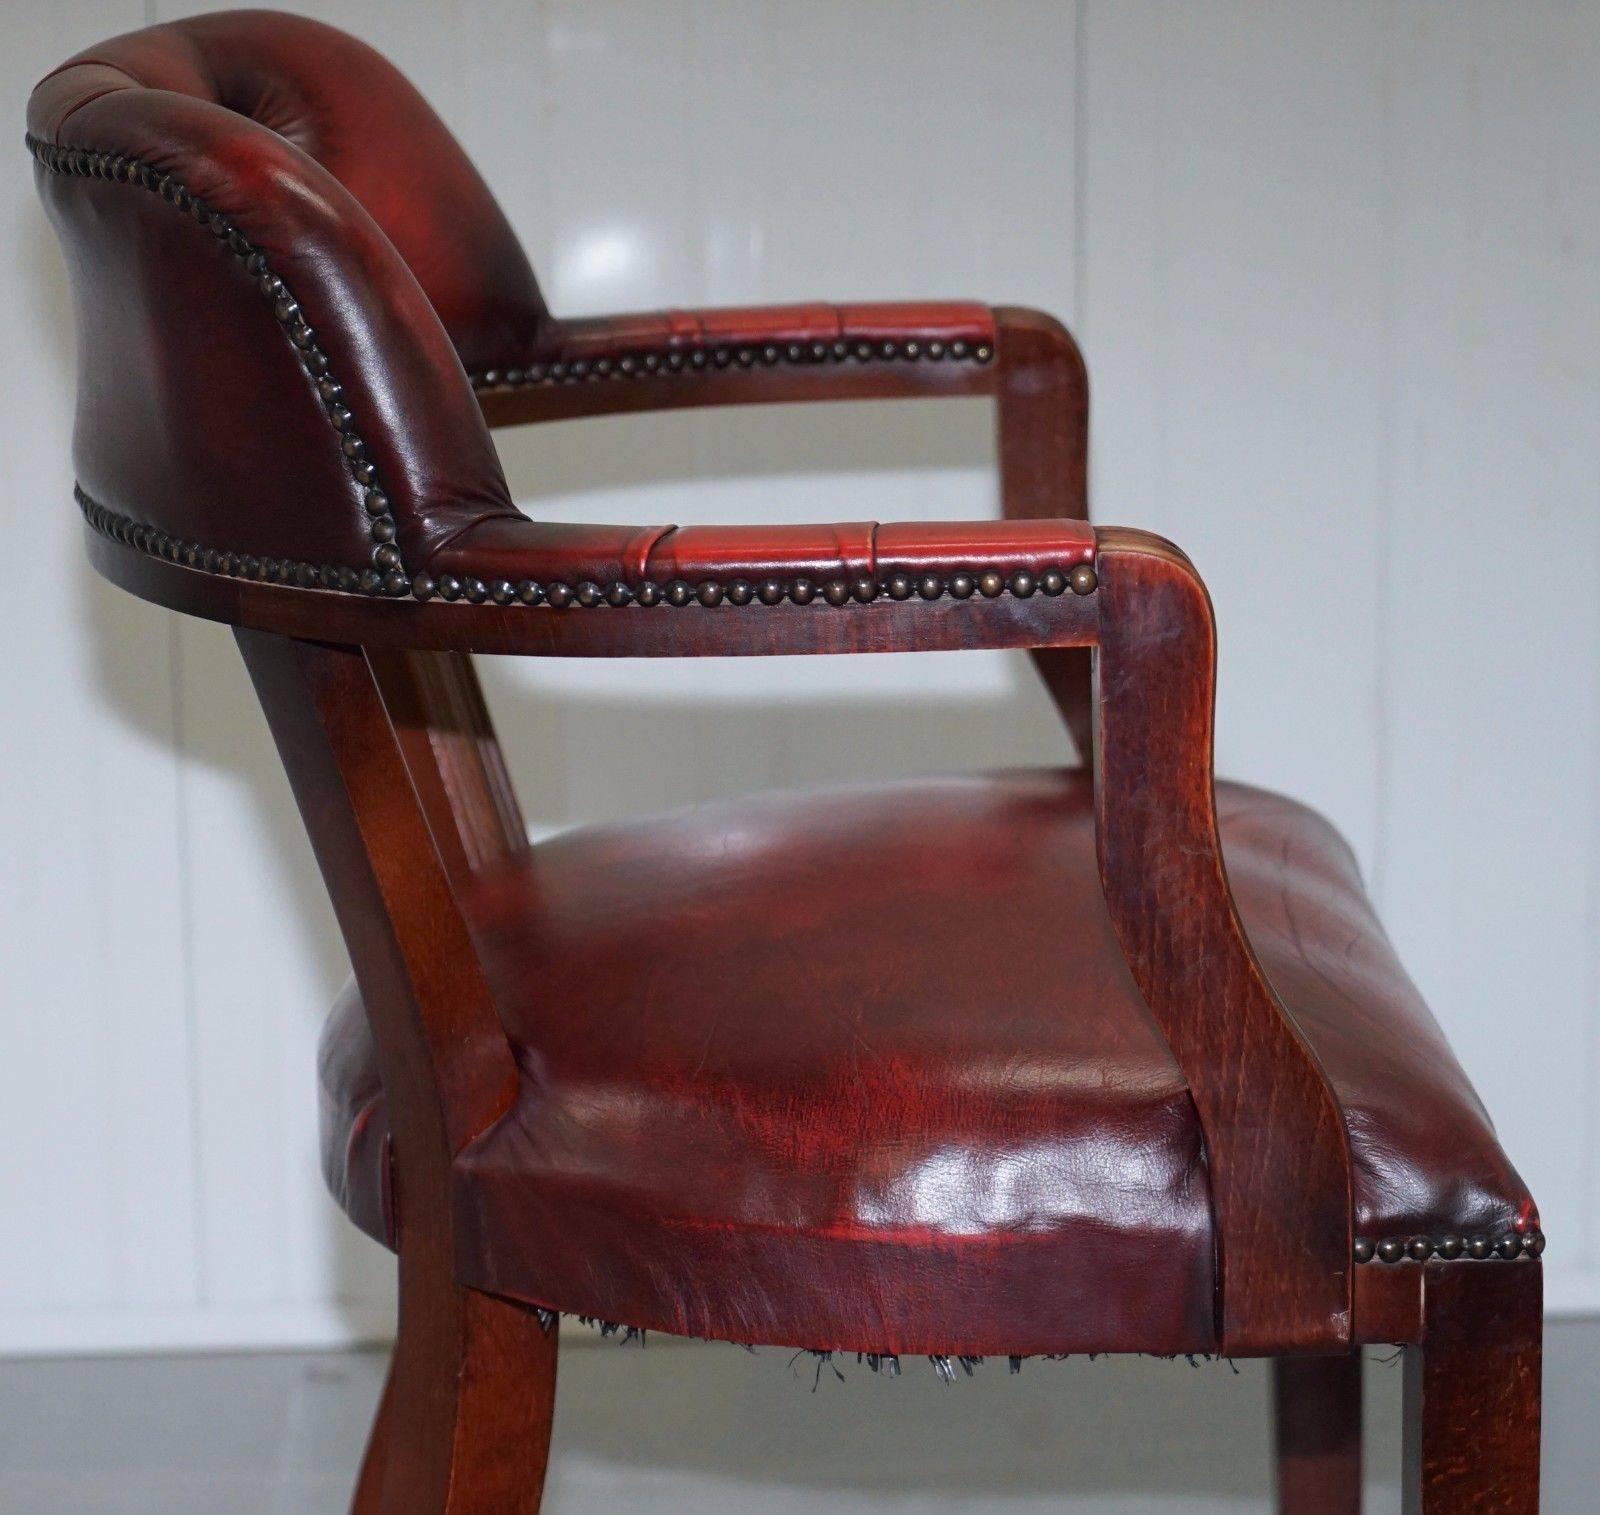 Lovely Oxblood Leather Chesterfield Court Chair for Desks or Guests Lovely Find 1